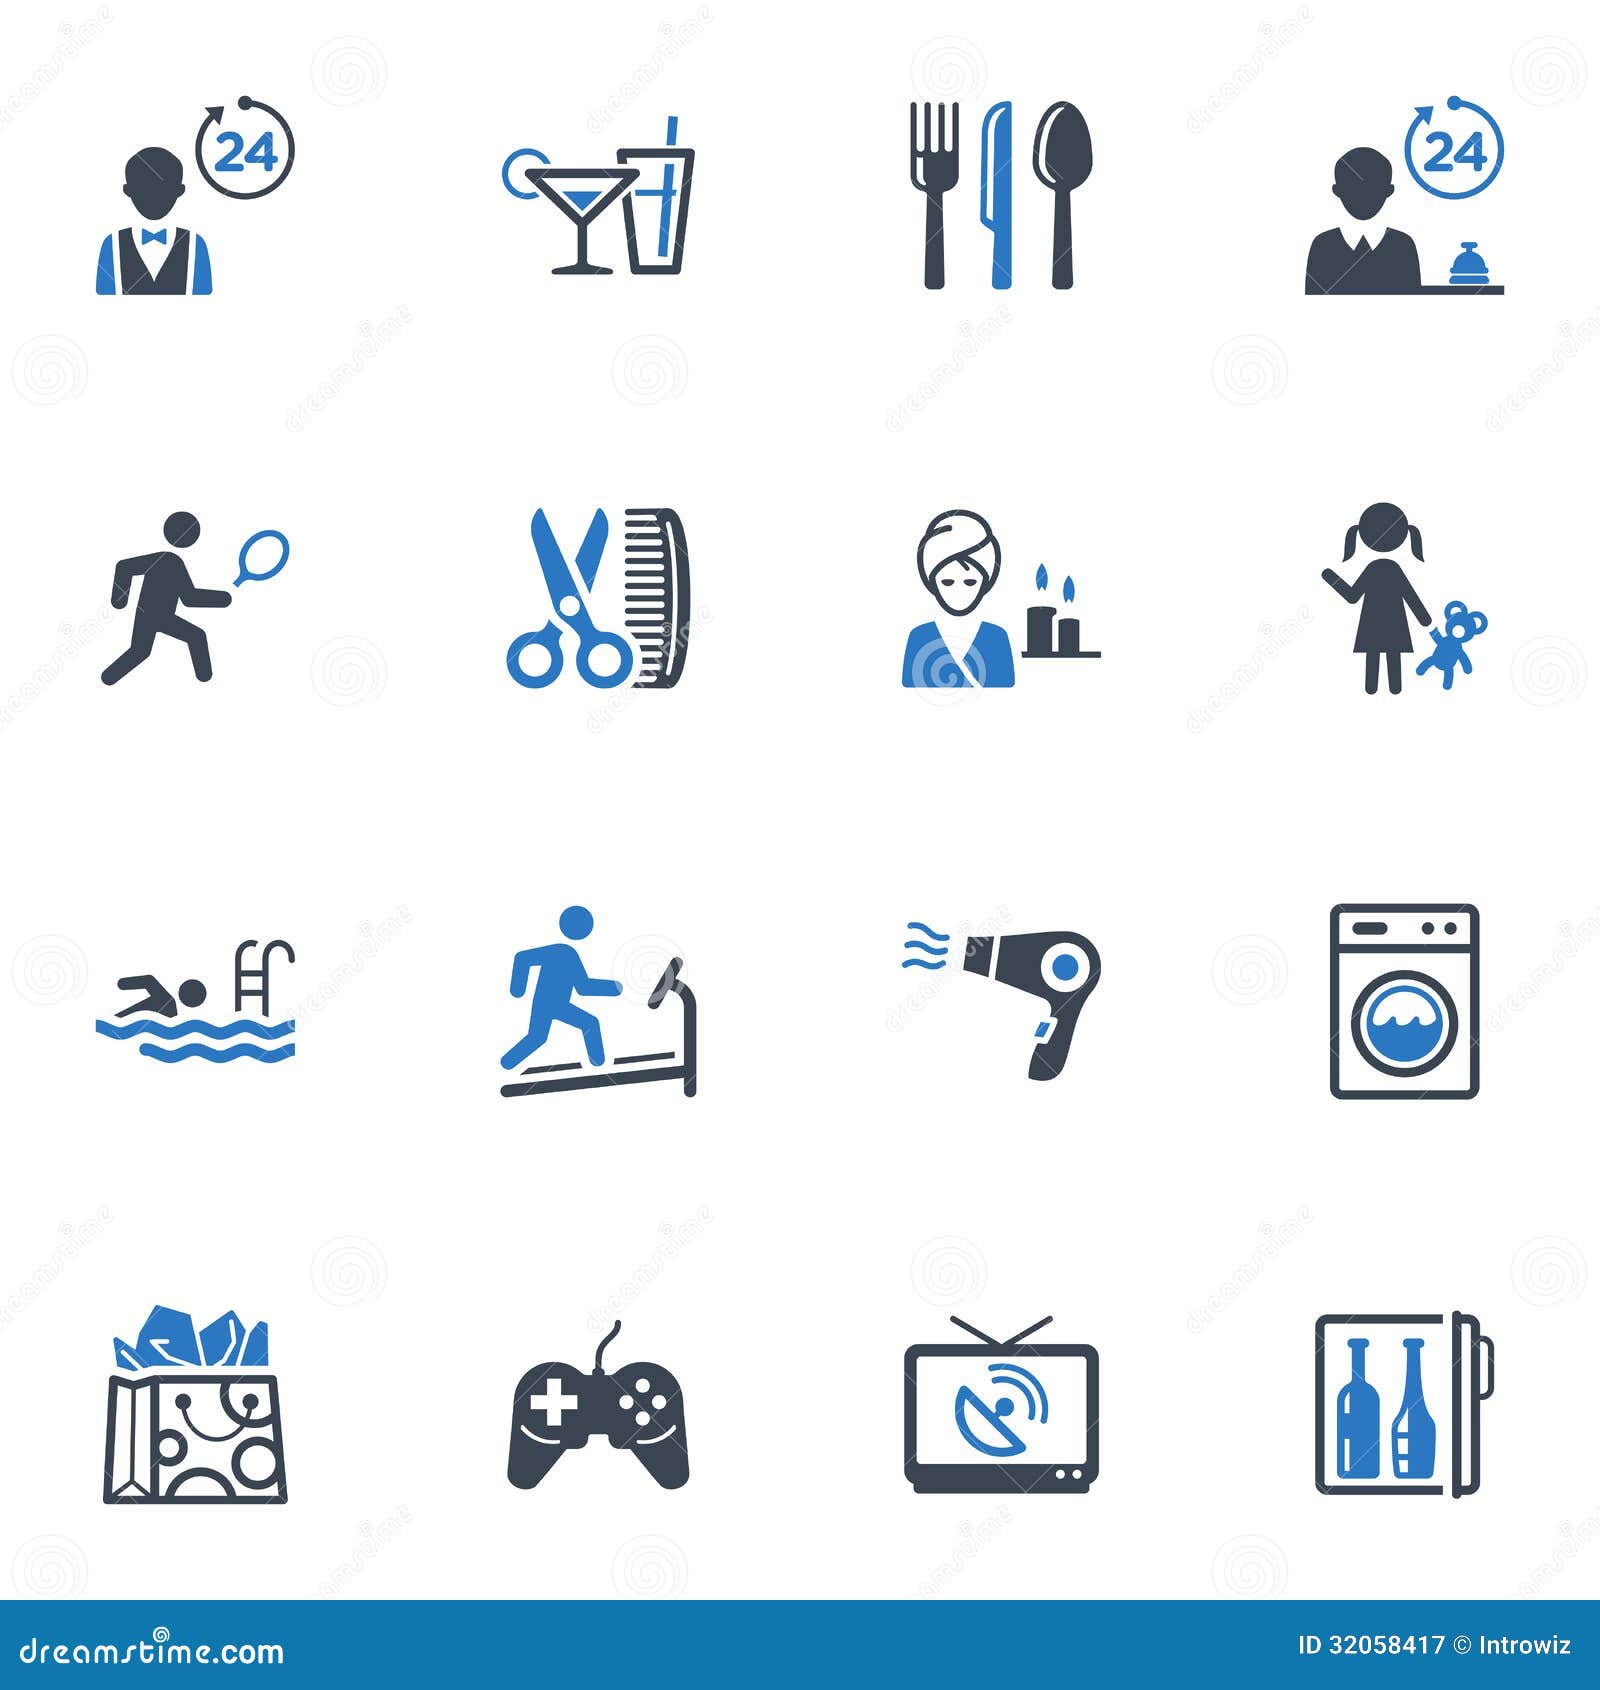 hotel services and facilities icons, set 2 - blue